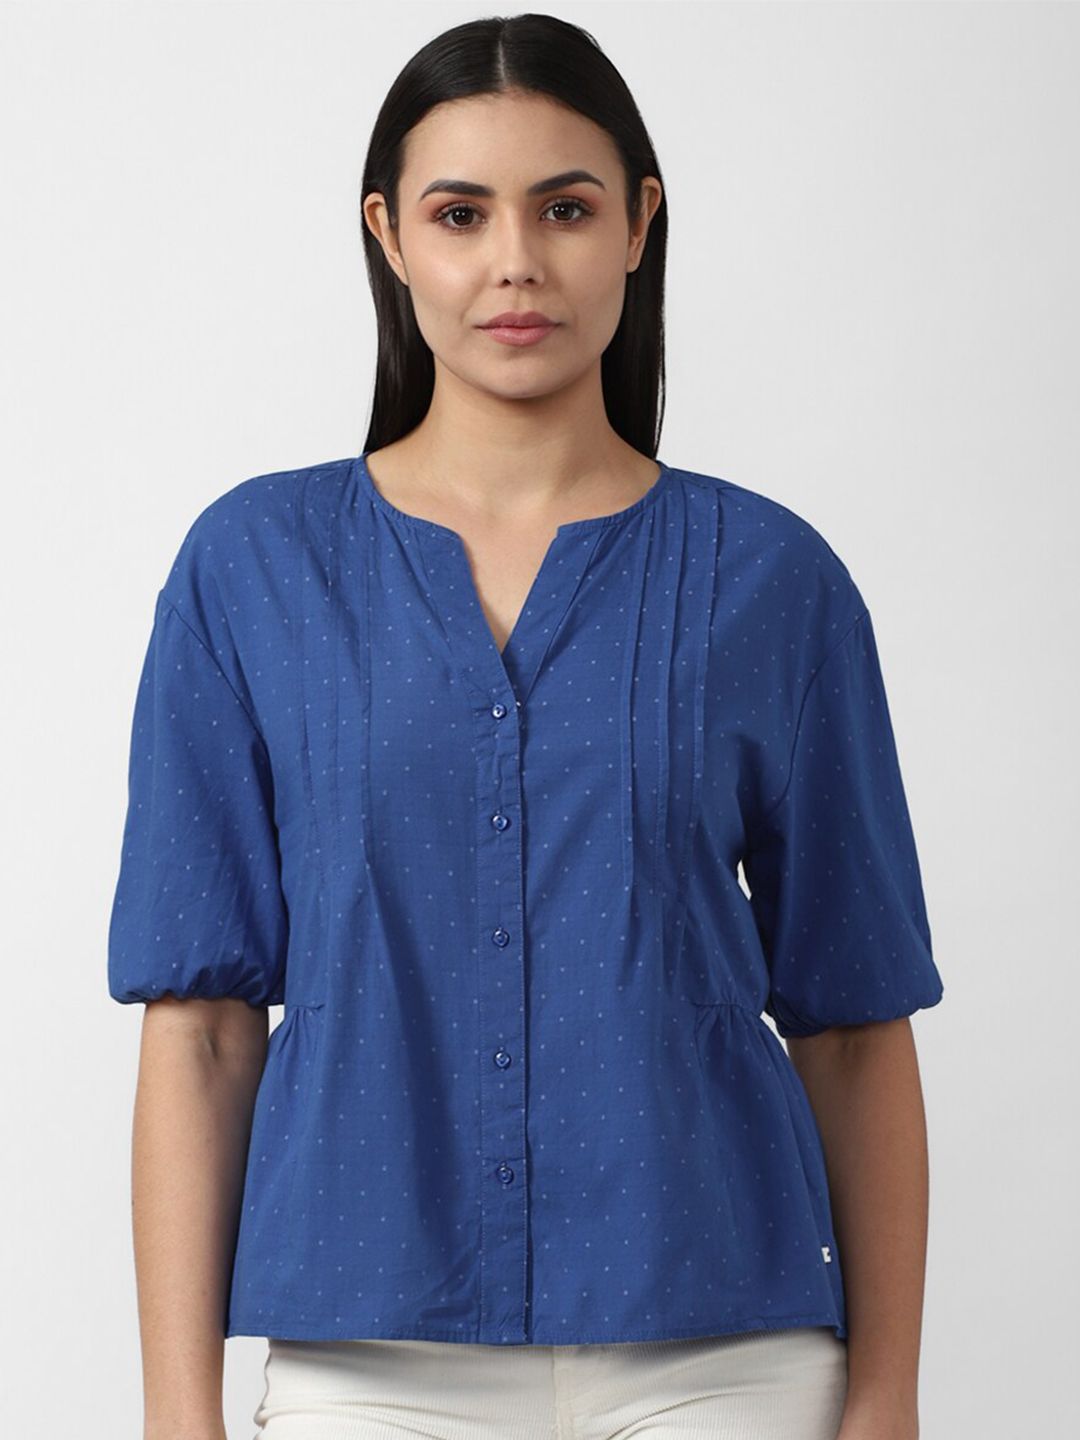 Van Heusen Woman Blue Polka Dots Printed Cotton Shirt Style Top Price in India